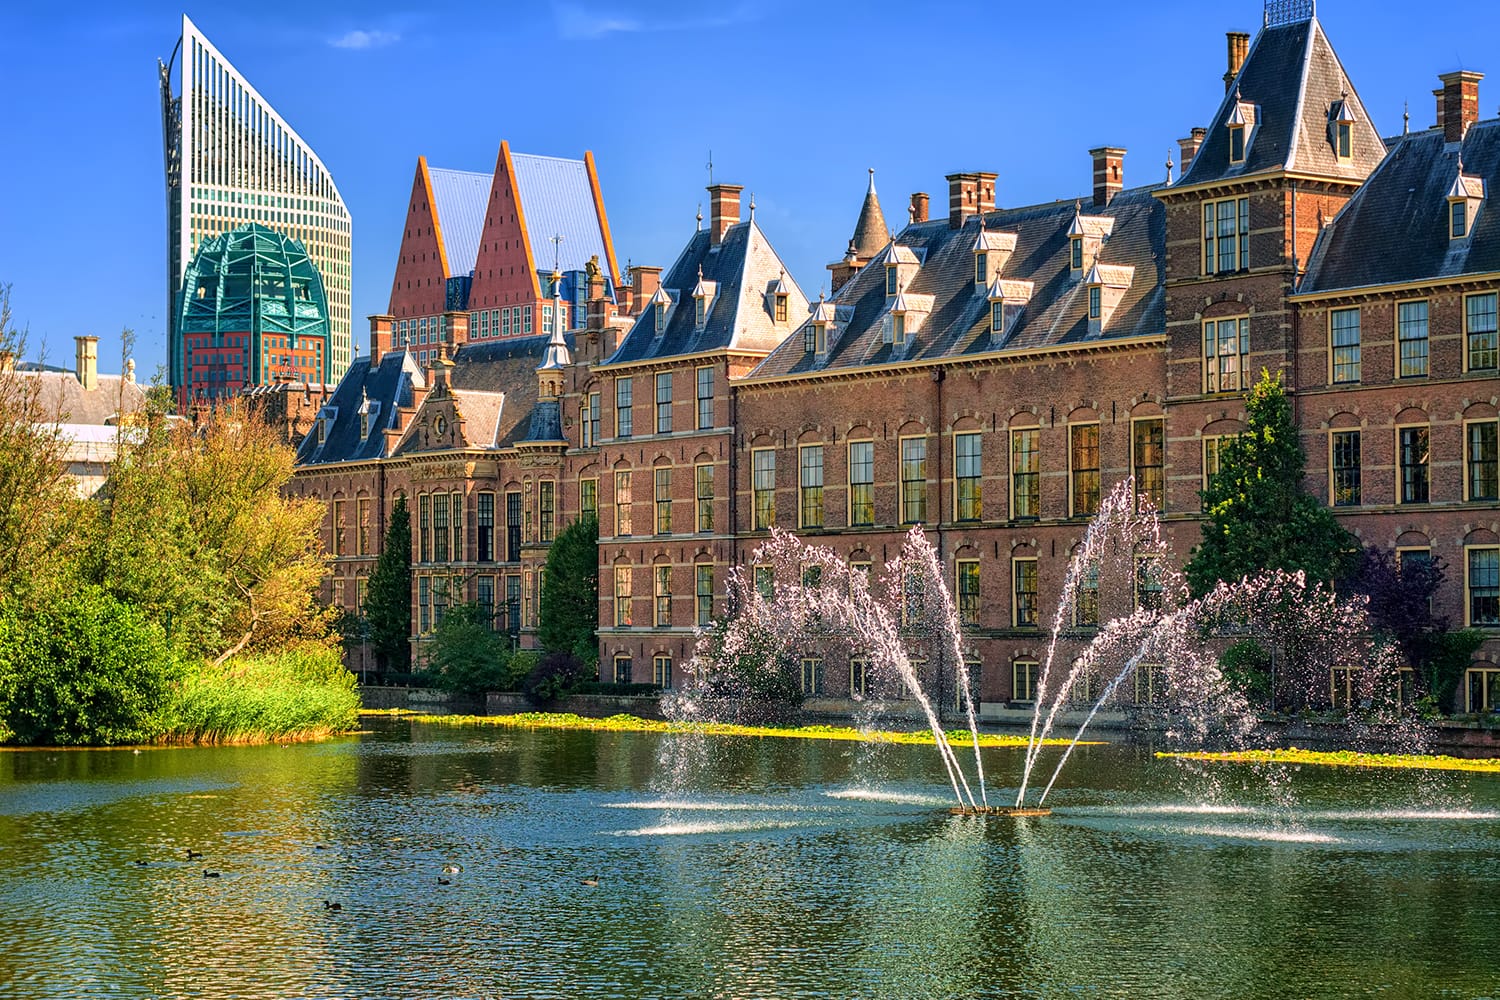 iew of the Binnenhof palace on place of Parliament, The Hague, Netherlands